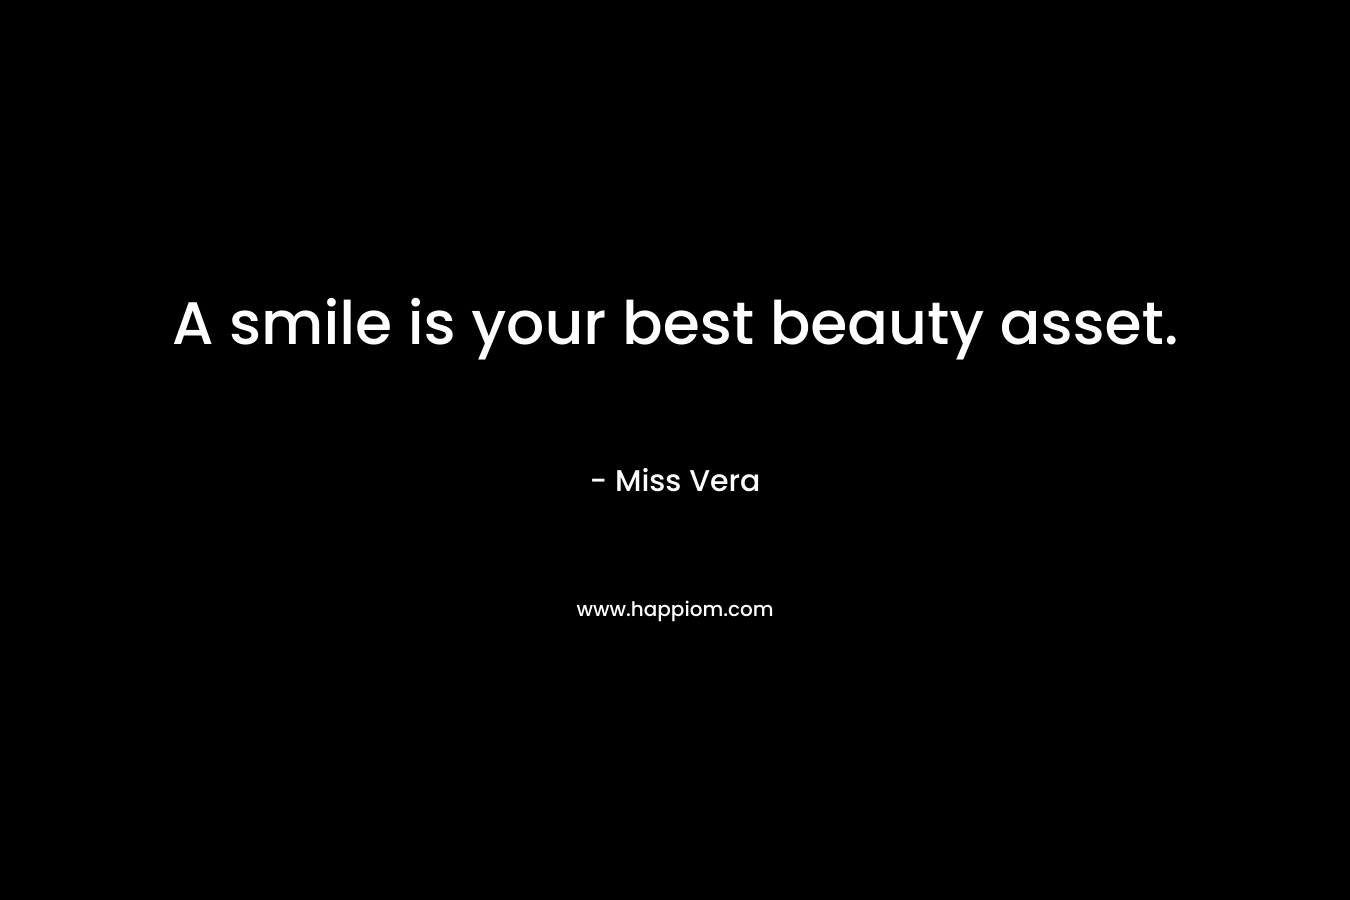 A smile is your best beauty asset.